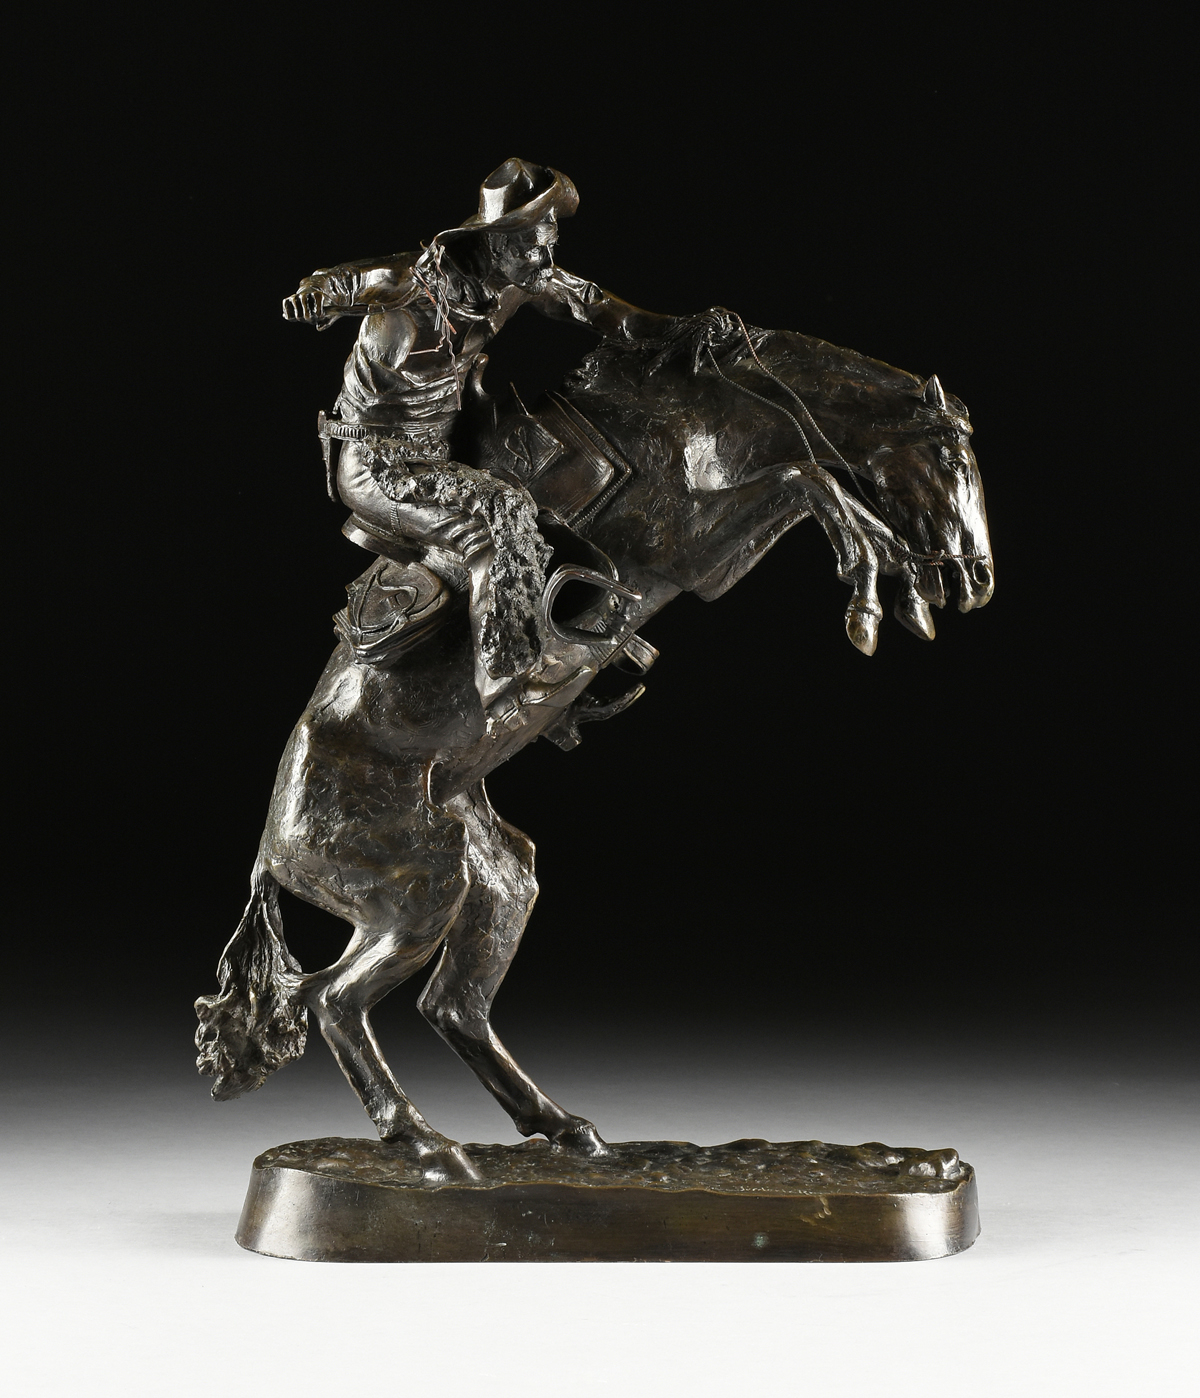 FREDERIC REMINGTON (American 1861-1909) A BRONZE SCULPTURE, "Bronco Buster," with dark brown